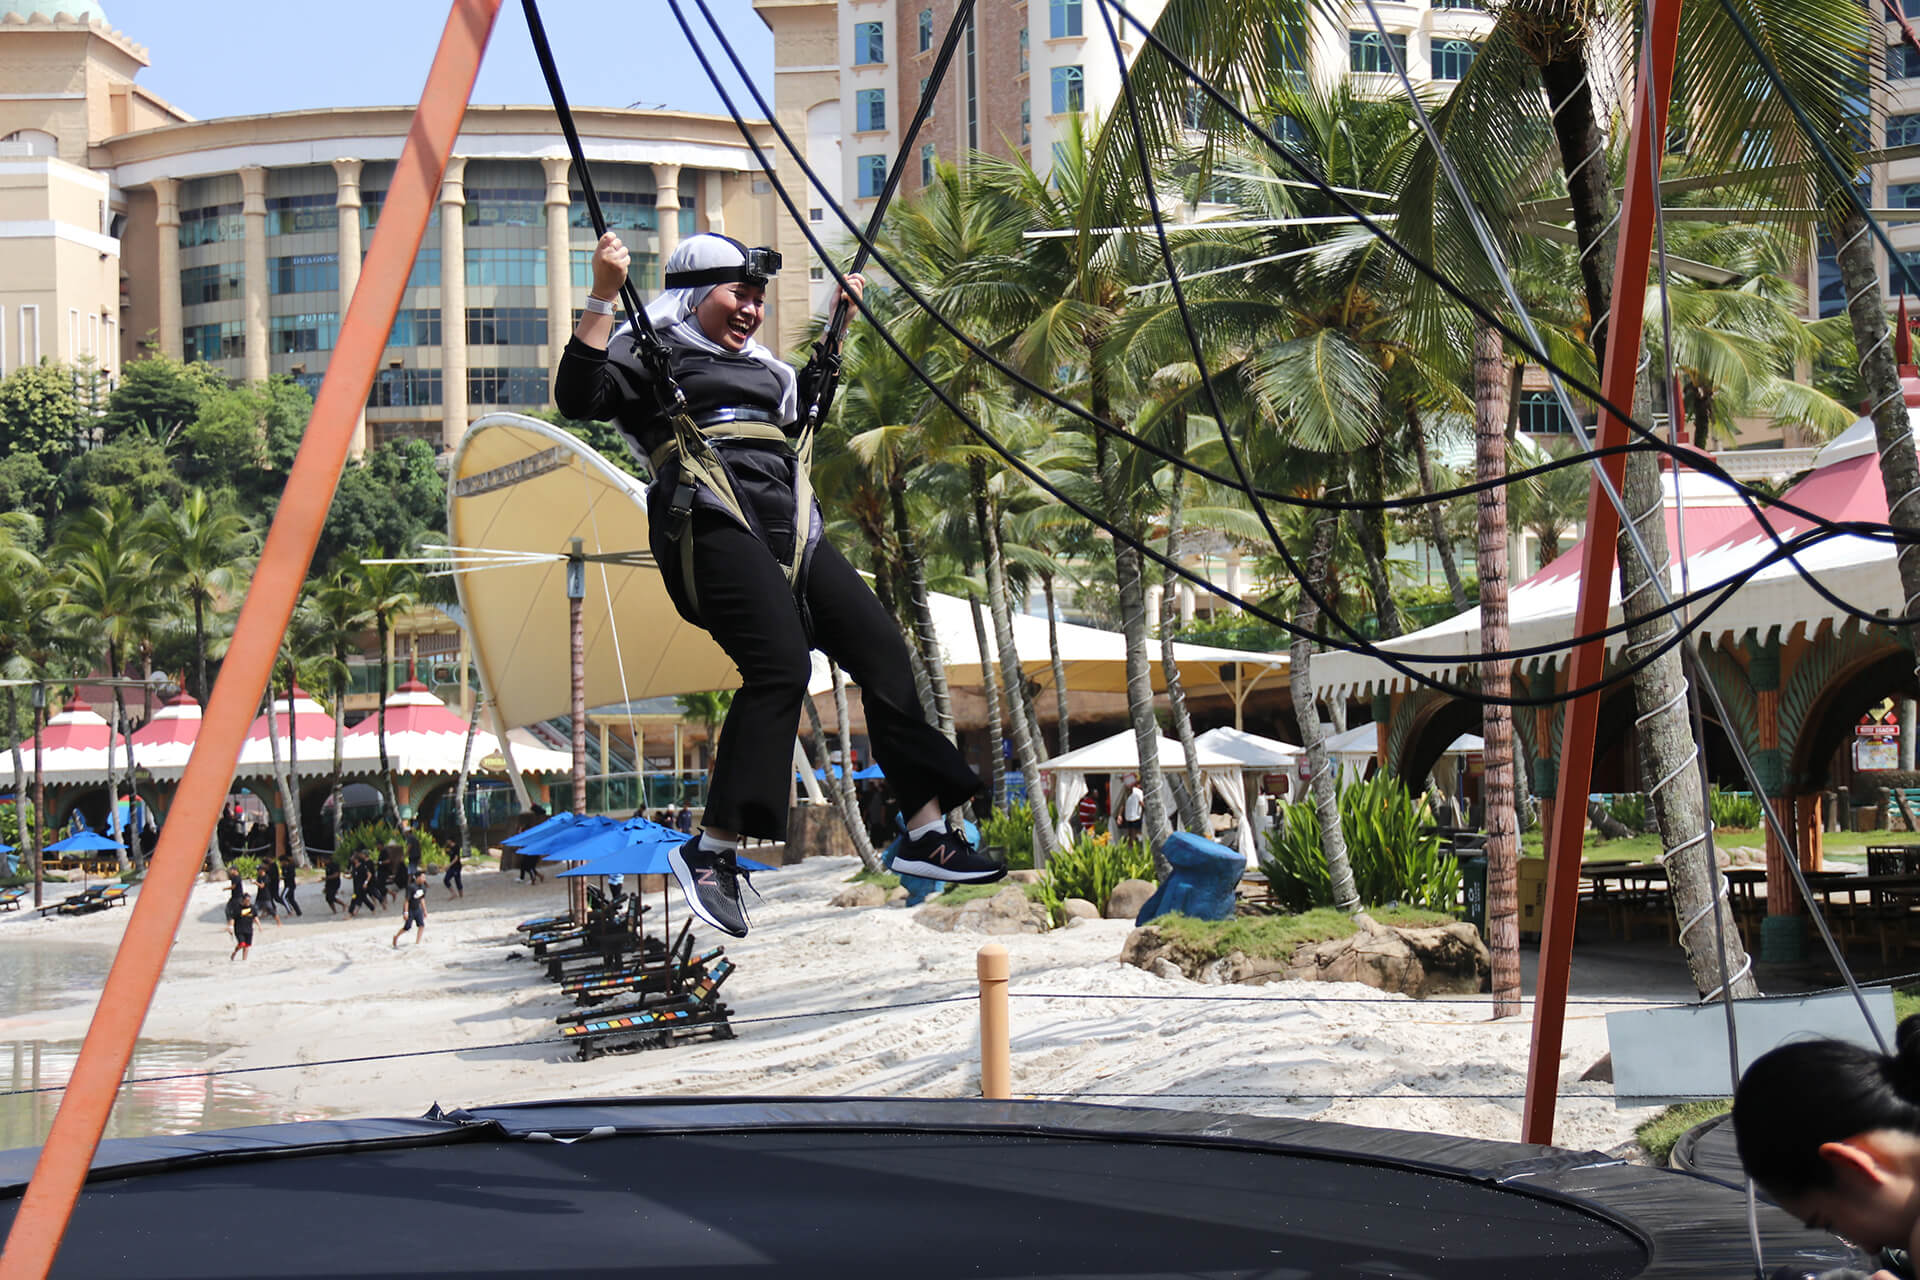 Levitate with Sunway Lagoon X Park’s Bungee Trampoline!